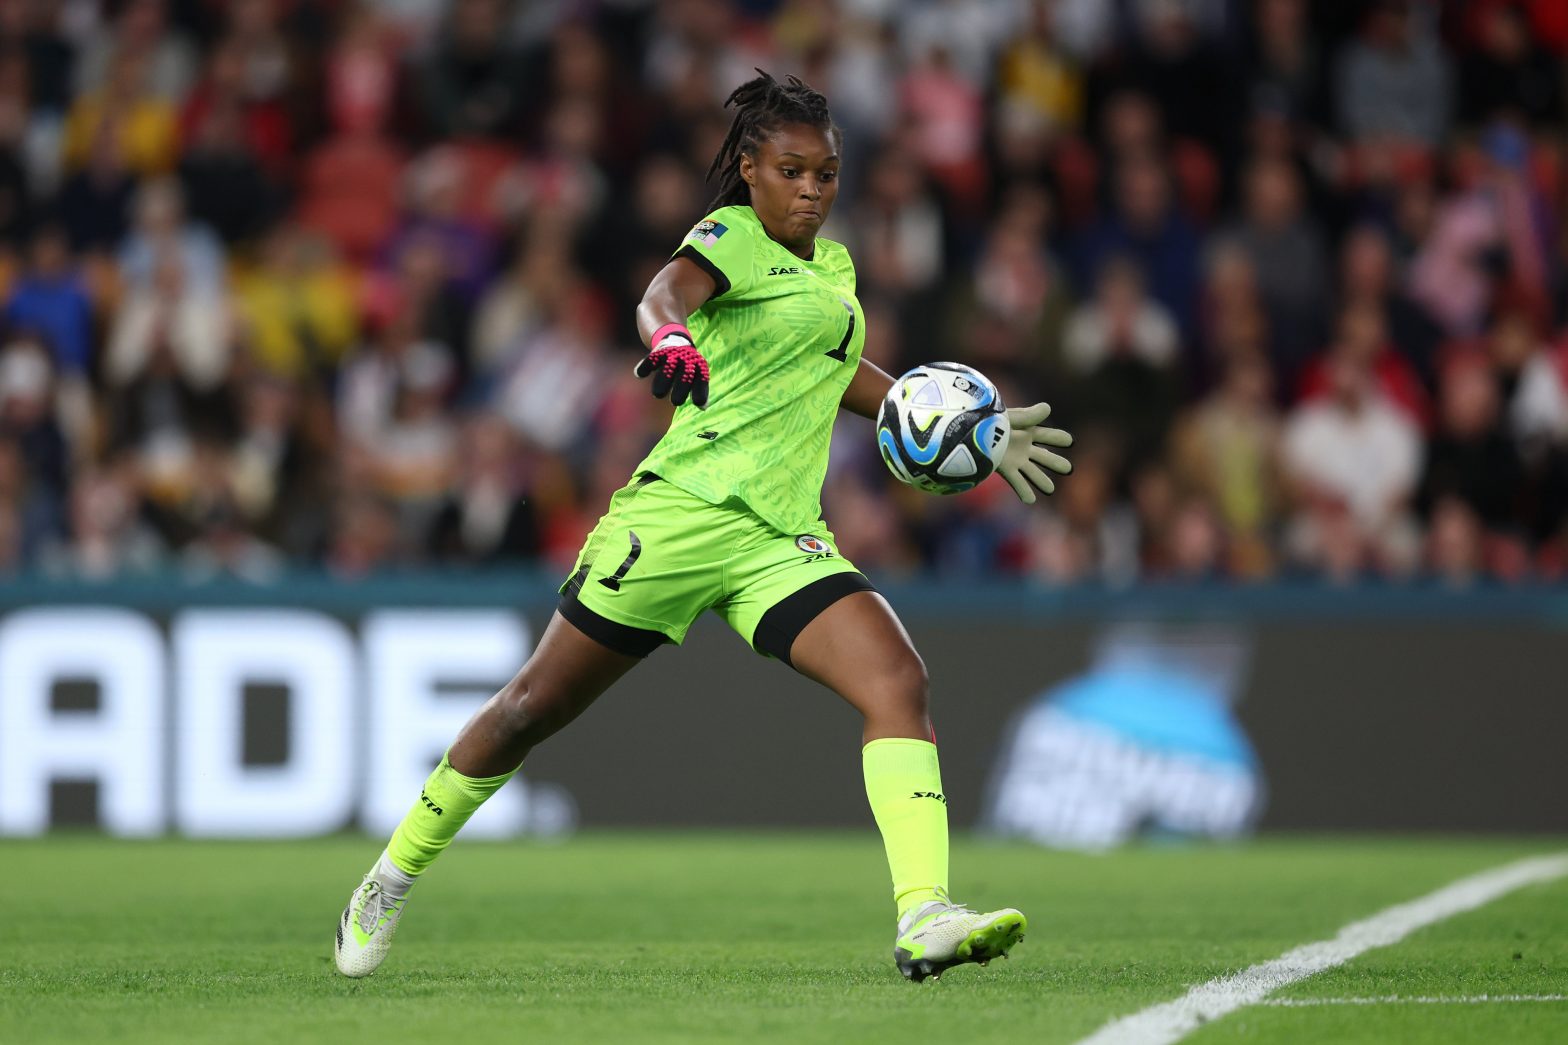 Who is Kerly Theus? Haiti goalkeeper stuns fans with great performance against England in FIFA World Cup